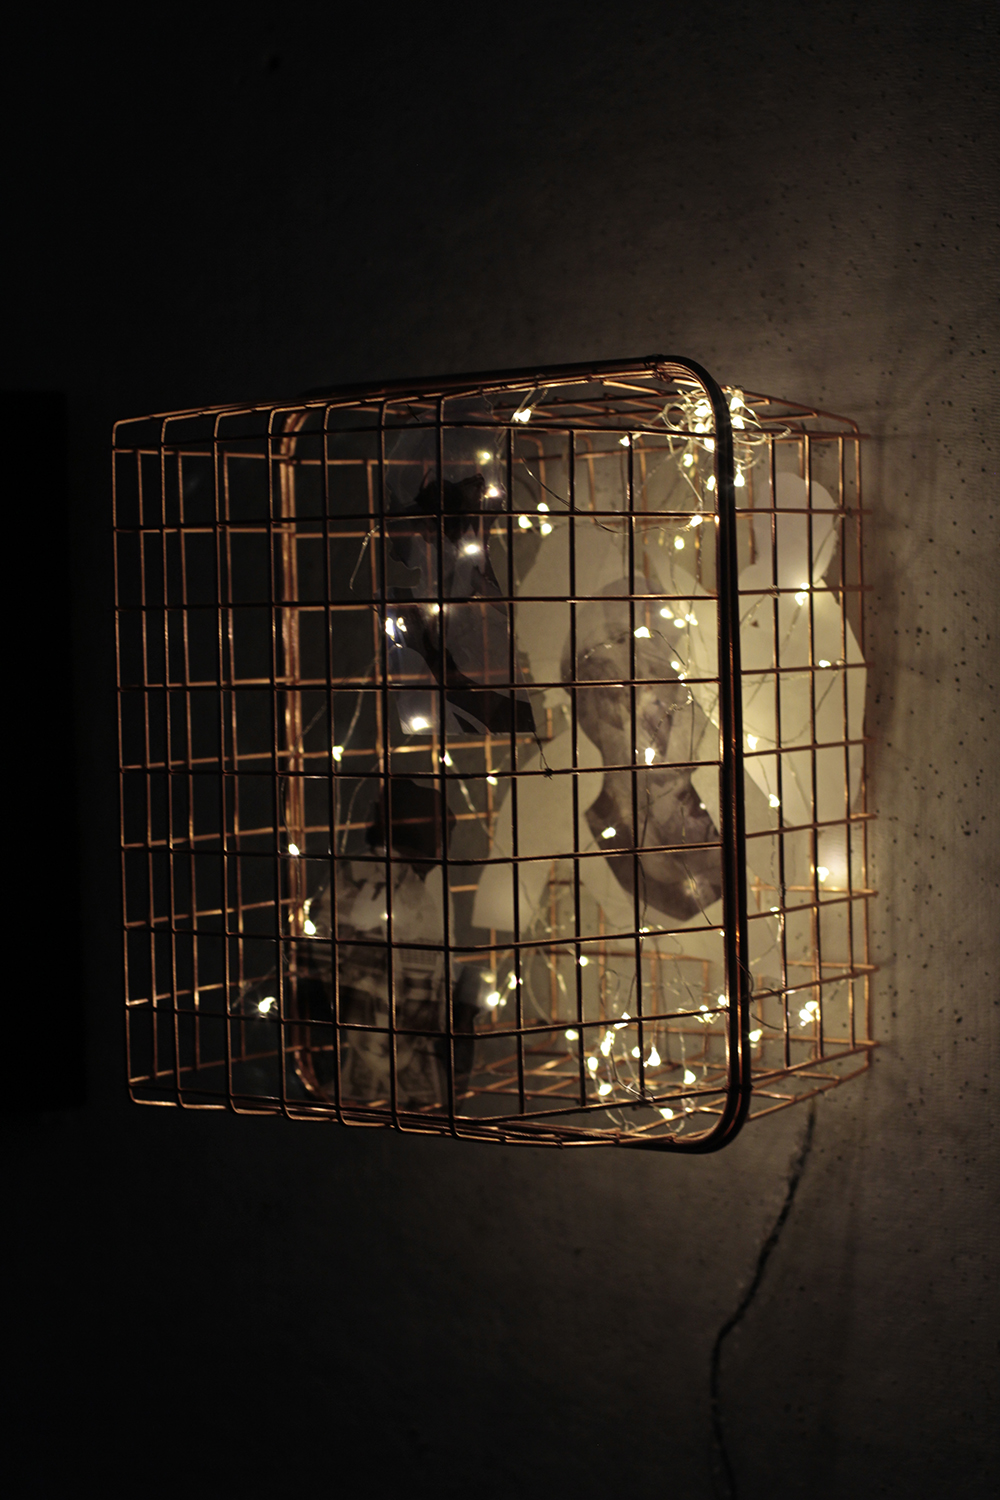 A photographed image of a box like cage with lights